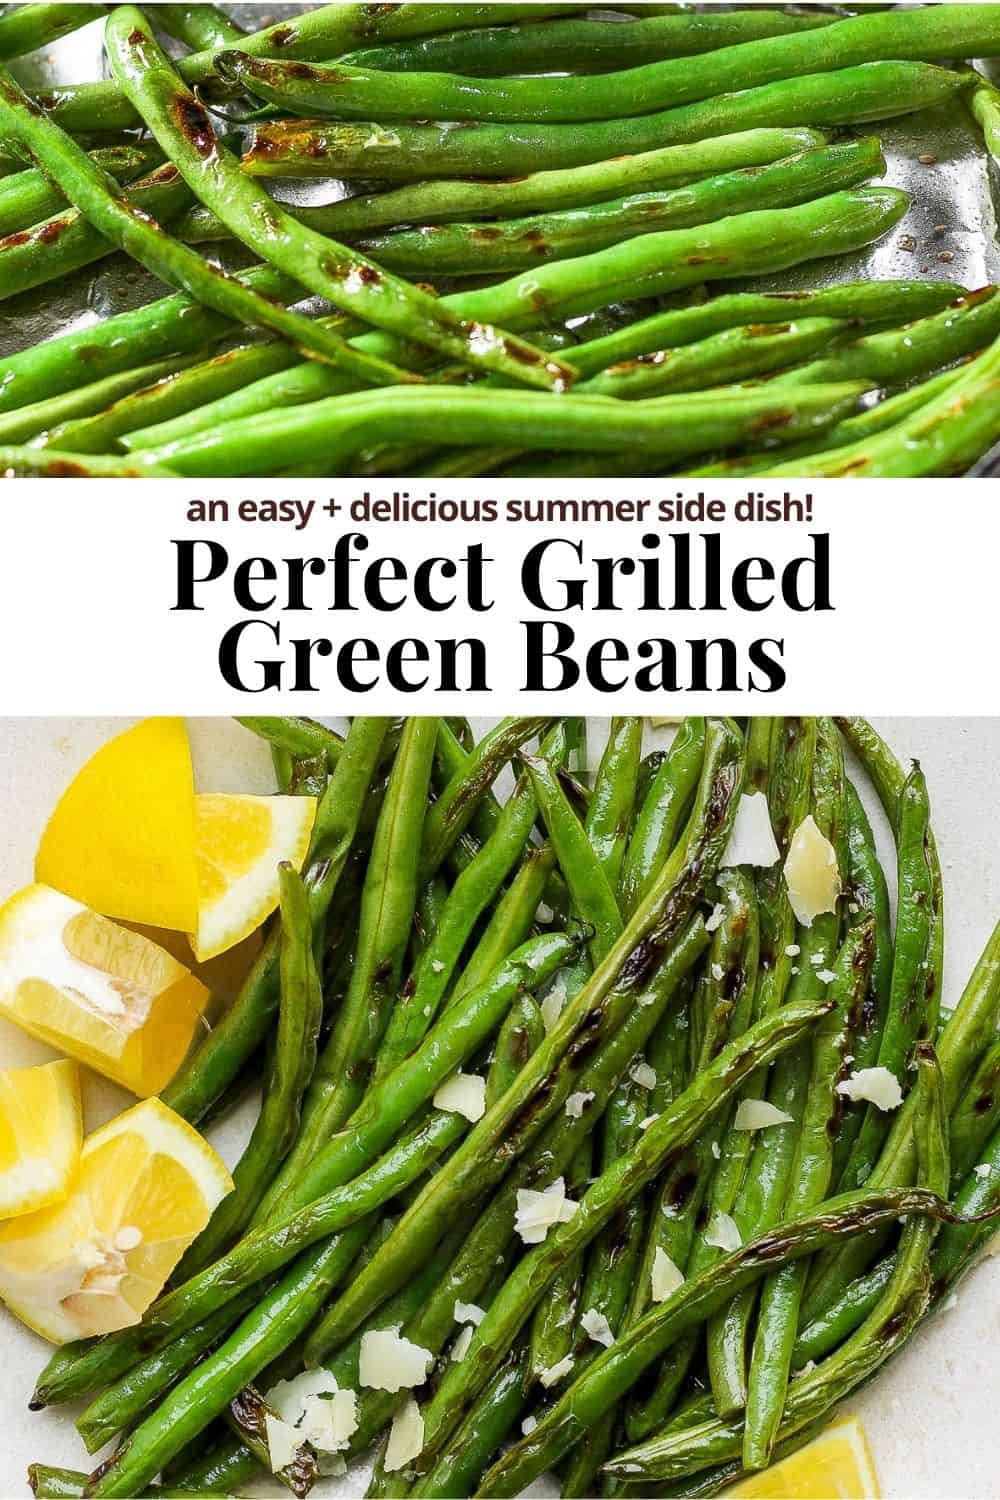 Pinterest image showing grilled green beans and the title "an easy + delicious summer side dish. Perfect Grilled Green Beans".